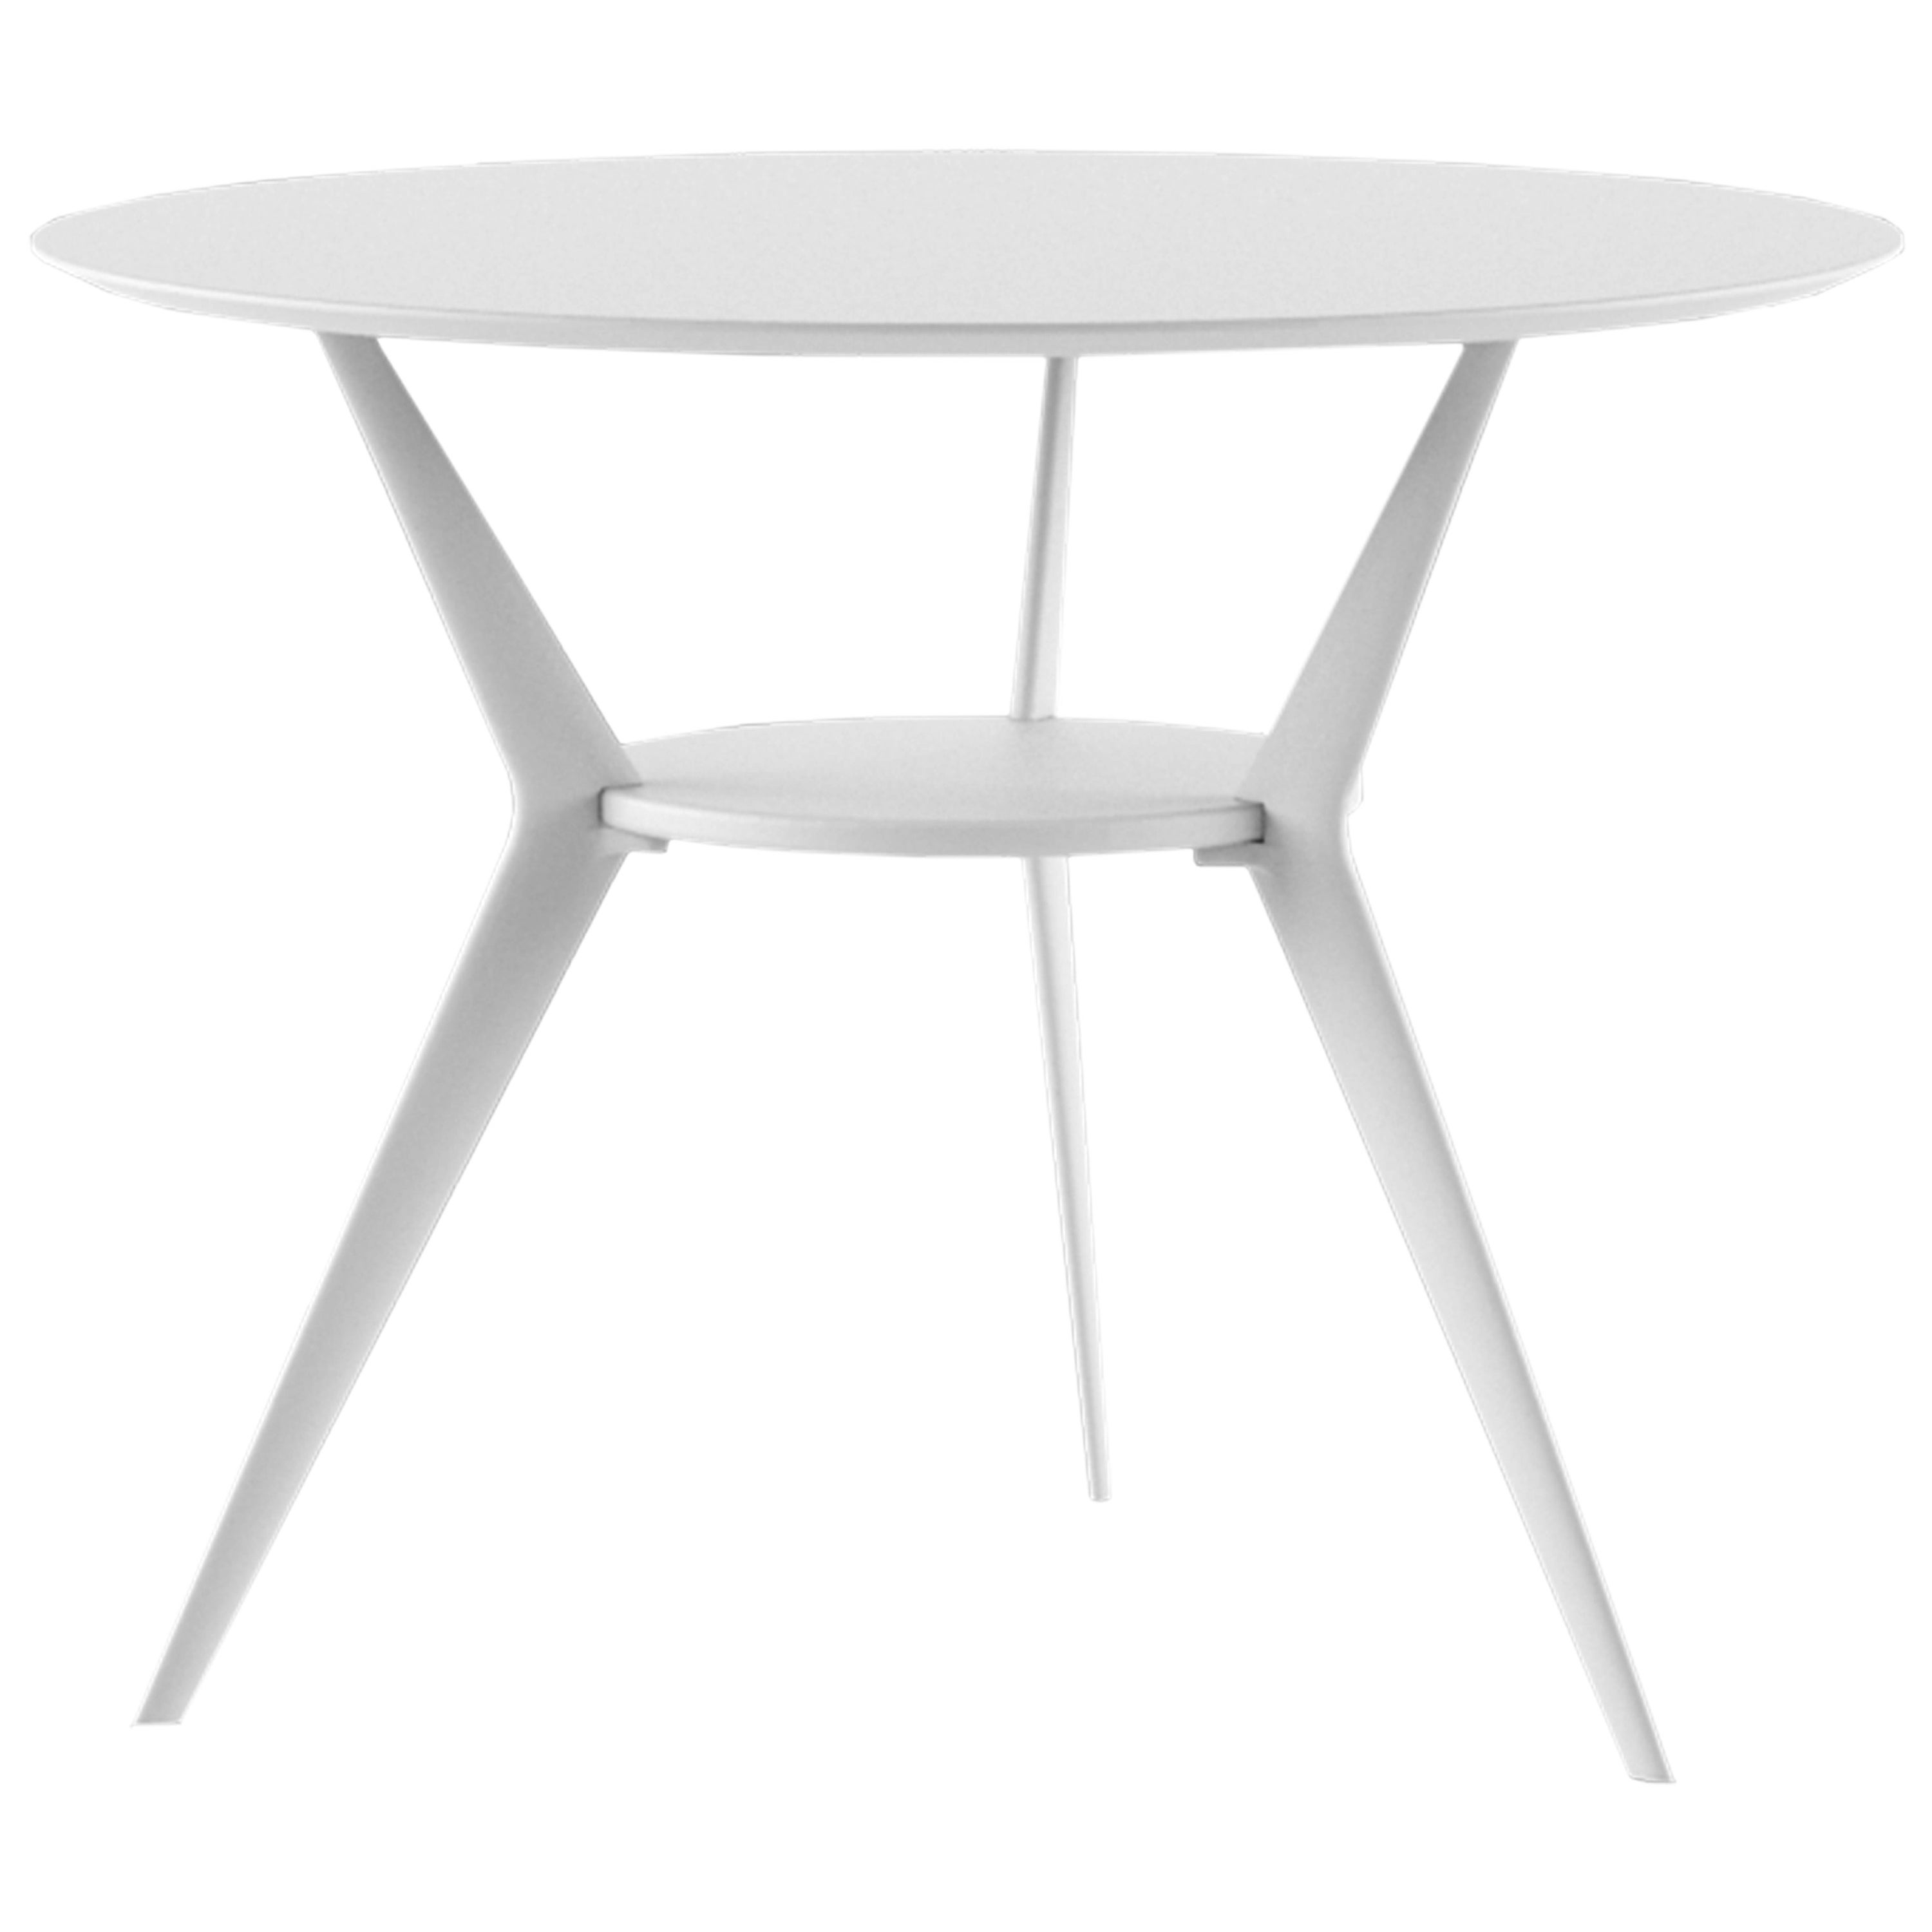 Alias B07 Biplane XS Ø62 Outdoor Table in White Top and Lacquered Frame For Sale